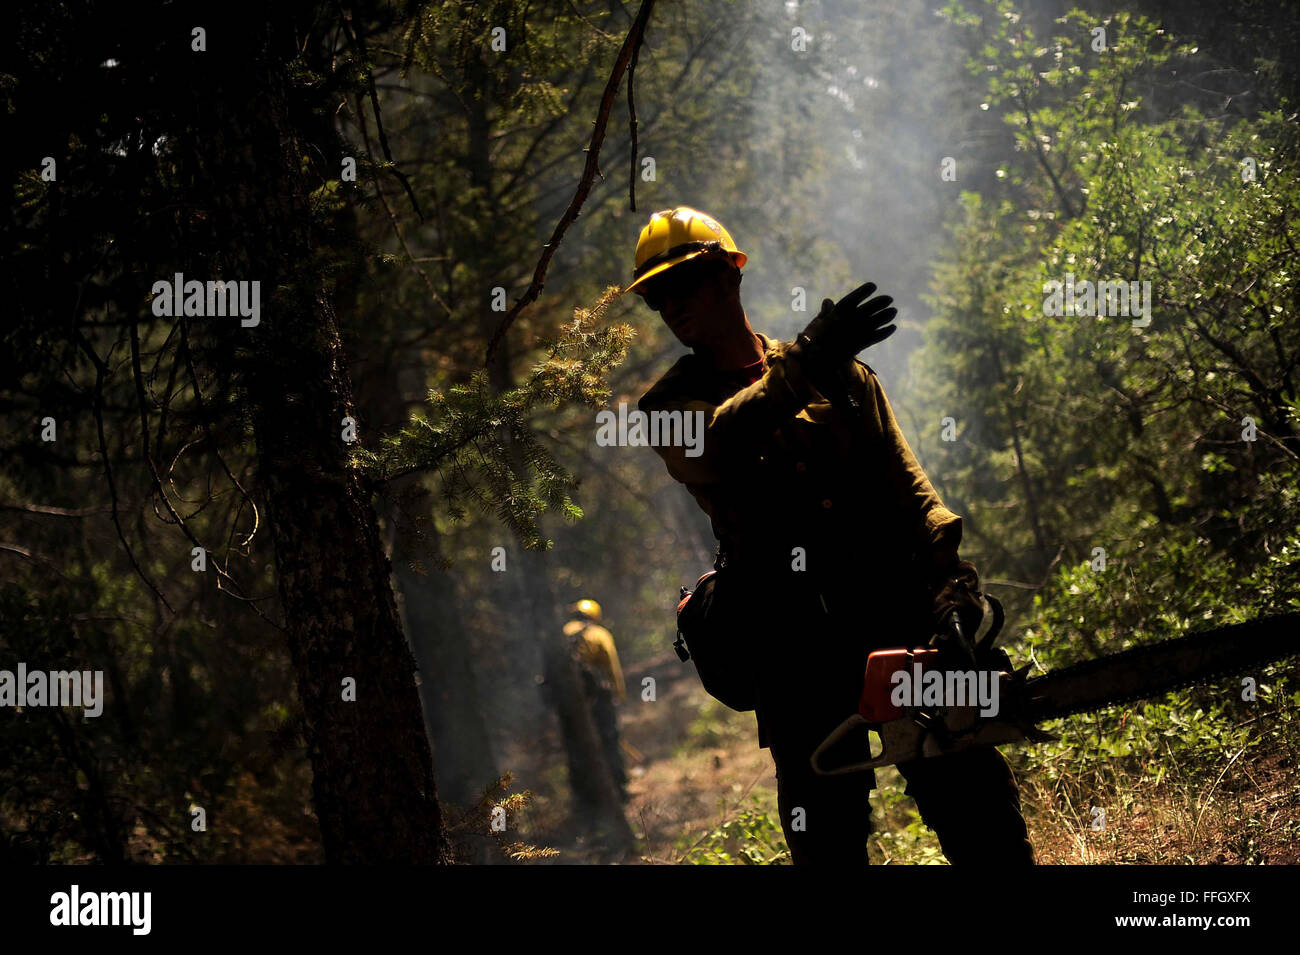 Vandenberg Air Force Base Hot Shot fire fighter Brad Mabery prepares to cut a tree with his chainsaw while cutting and clearing a fire line on June 28, 2012 in the Mount Saint Francois area of Colorado Springs, Co. His team is helping to battle several fires in Waldo Canyon.  The Waldo Canyon fire has grown to 18,500 acres and burned over 300 homes. Currently, more than 90 firefighters from the Academy, along with assets from Air Force Space Command; F.E. Warren Air Force Base, Wyo.; Fort Carson, Colo.; and the local community continue to fight the Waldo Canyon fire Stock Photo